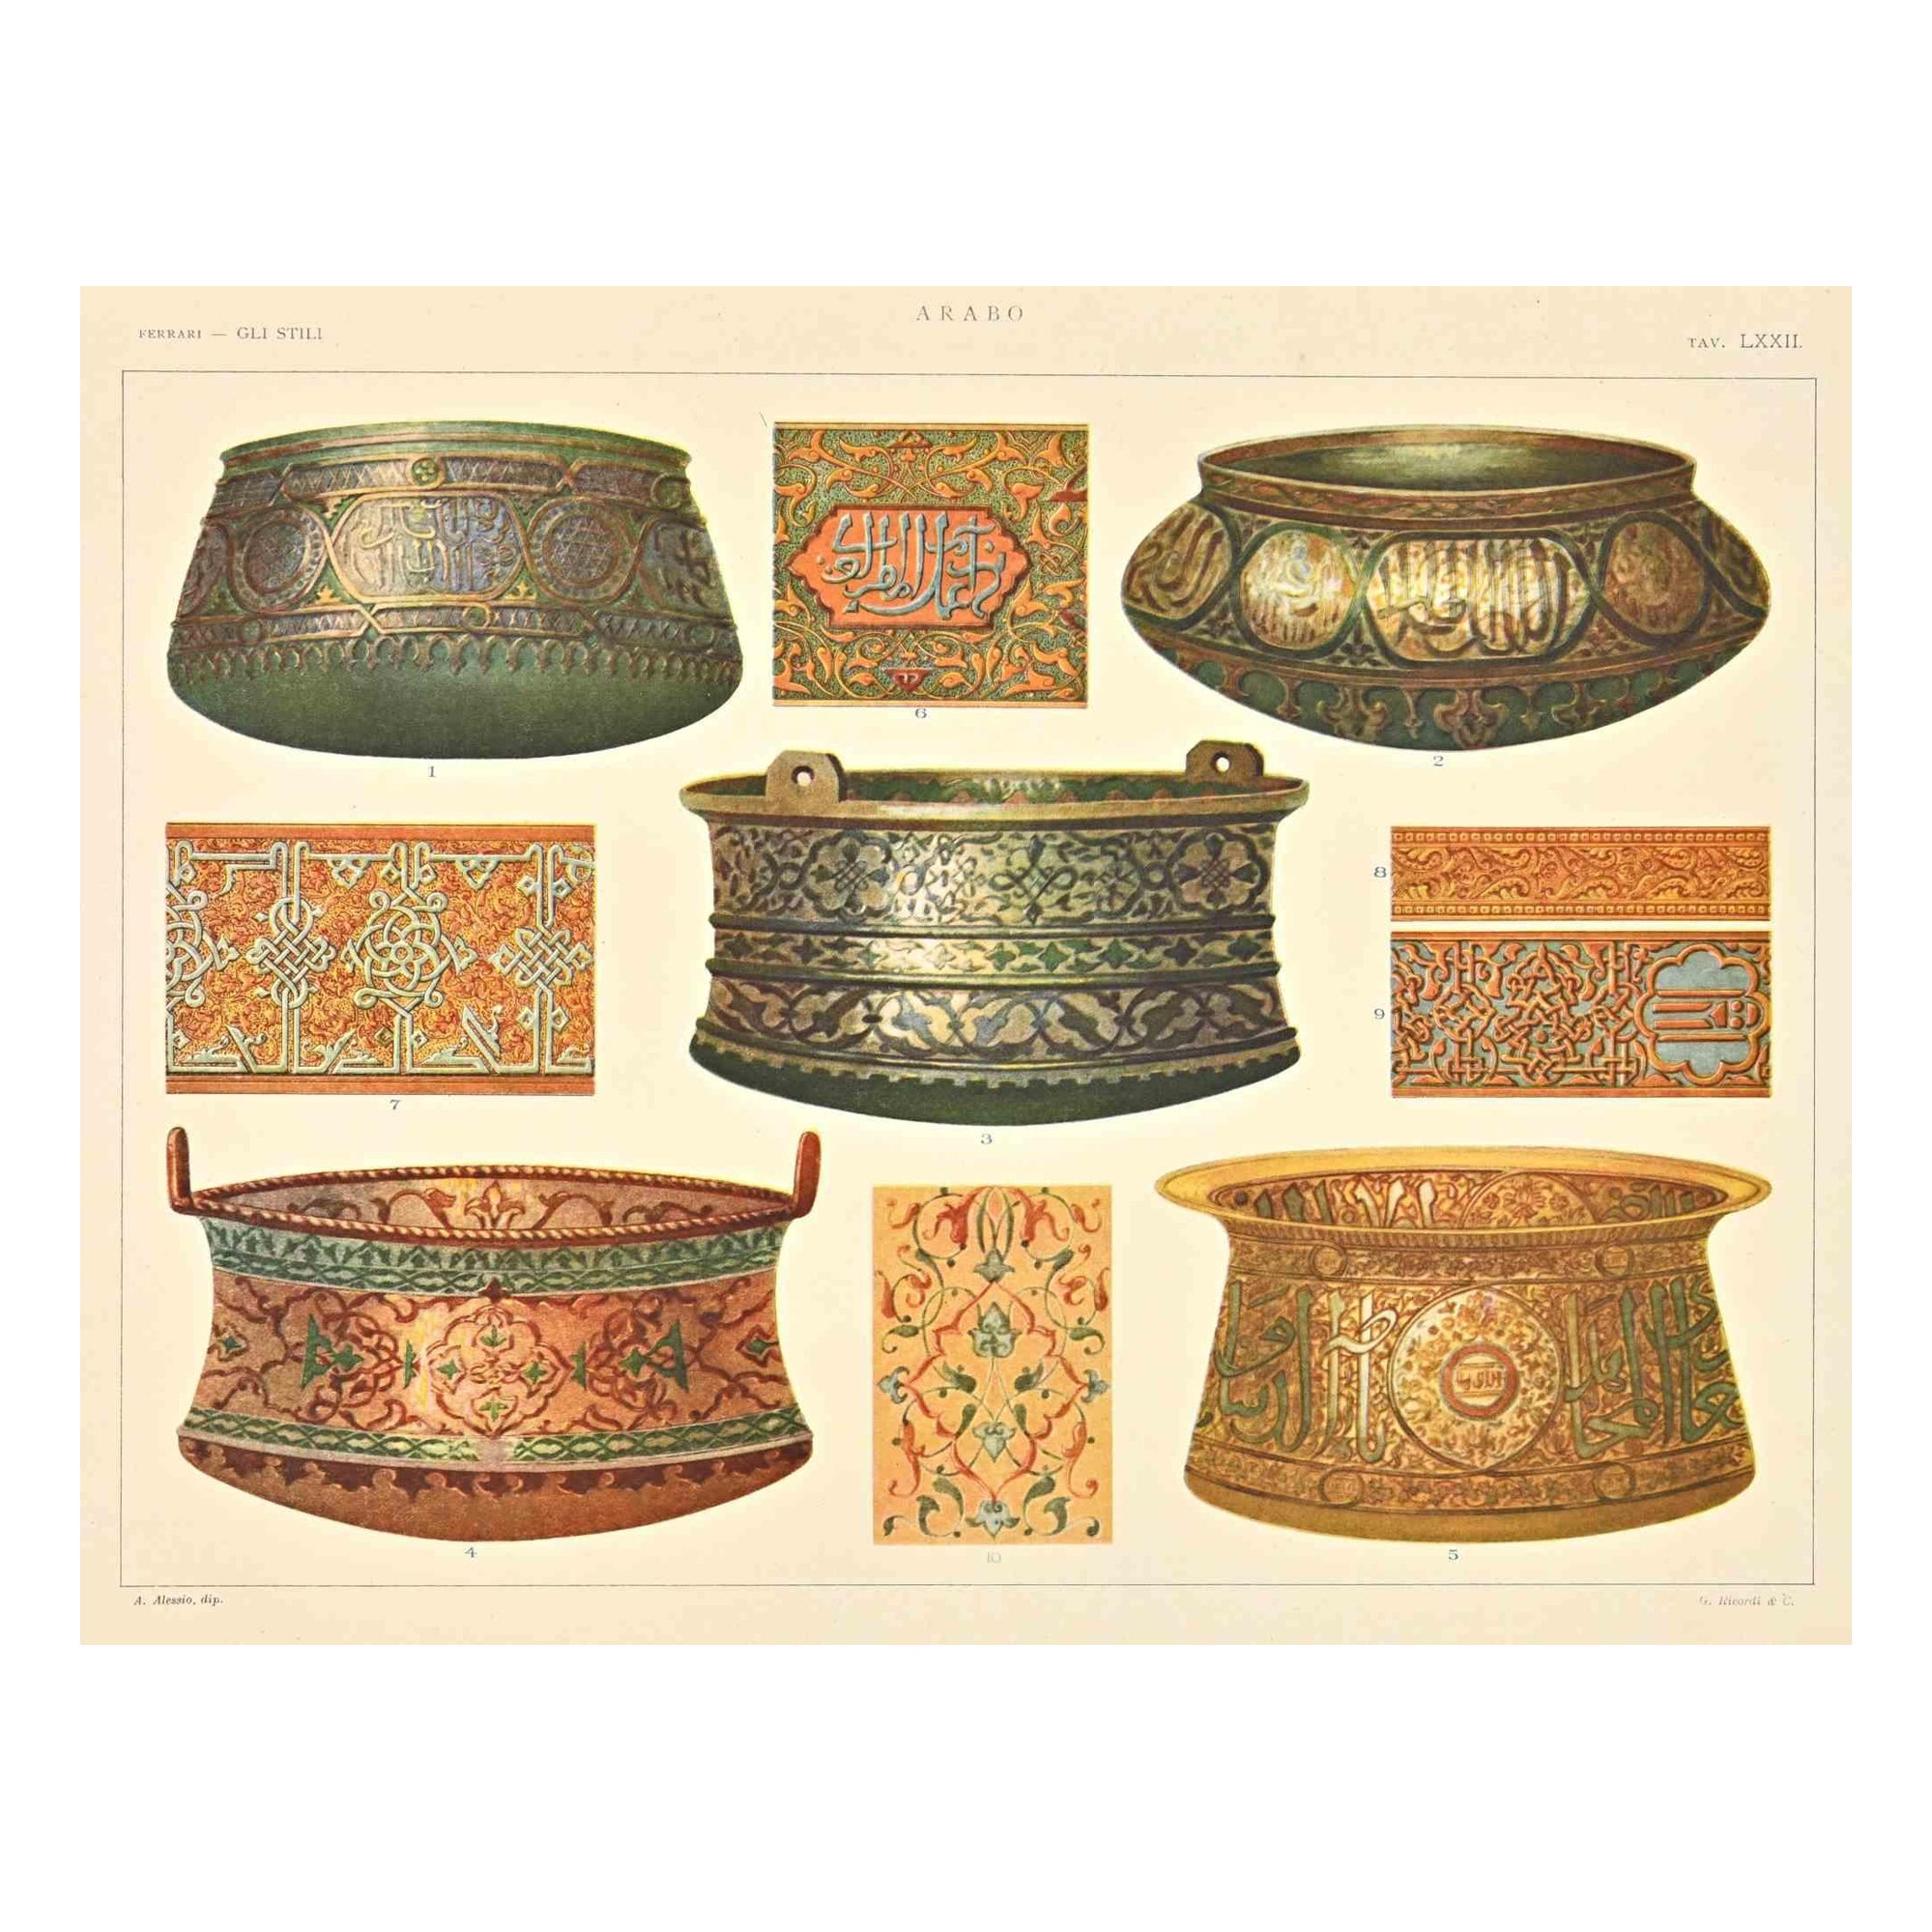 Decorative Objects in  Arab Style is a print on ivory-colored paper realized by  A. Alessio in the early 20th Century. Signed on the plate on the lower.

Vintage Chromolithograph.

Very good conditions.

The artwork represents Decorative motifs